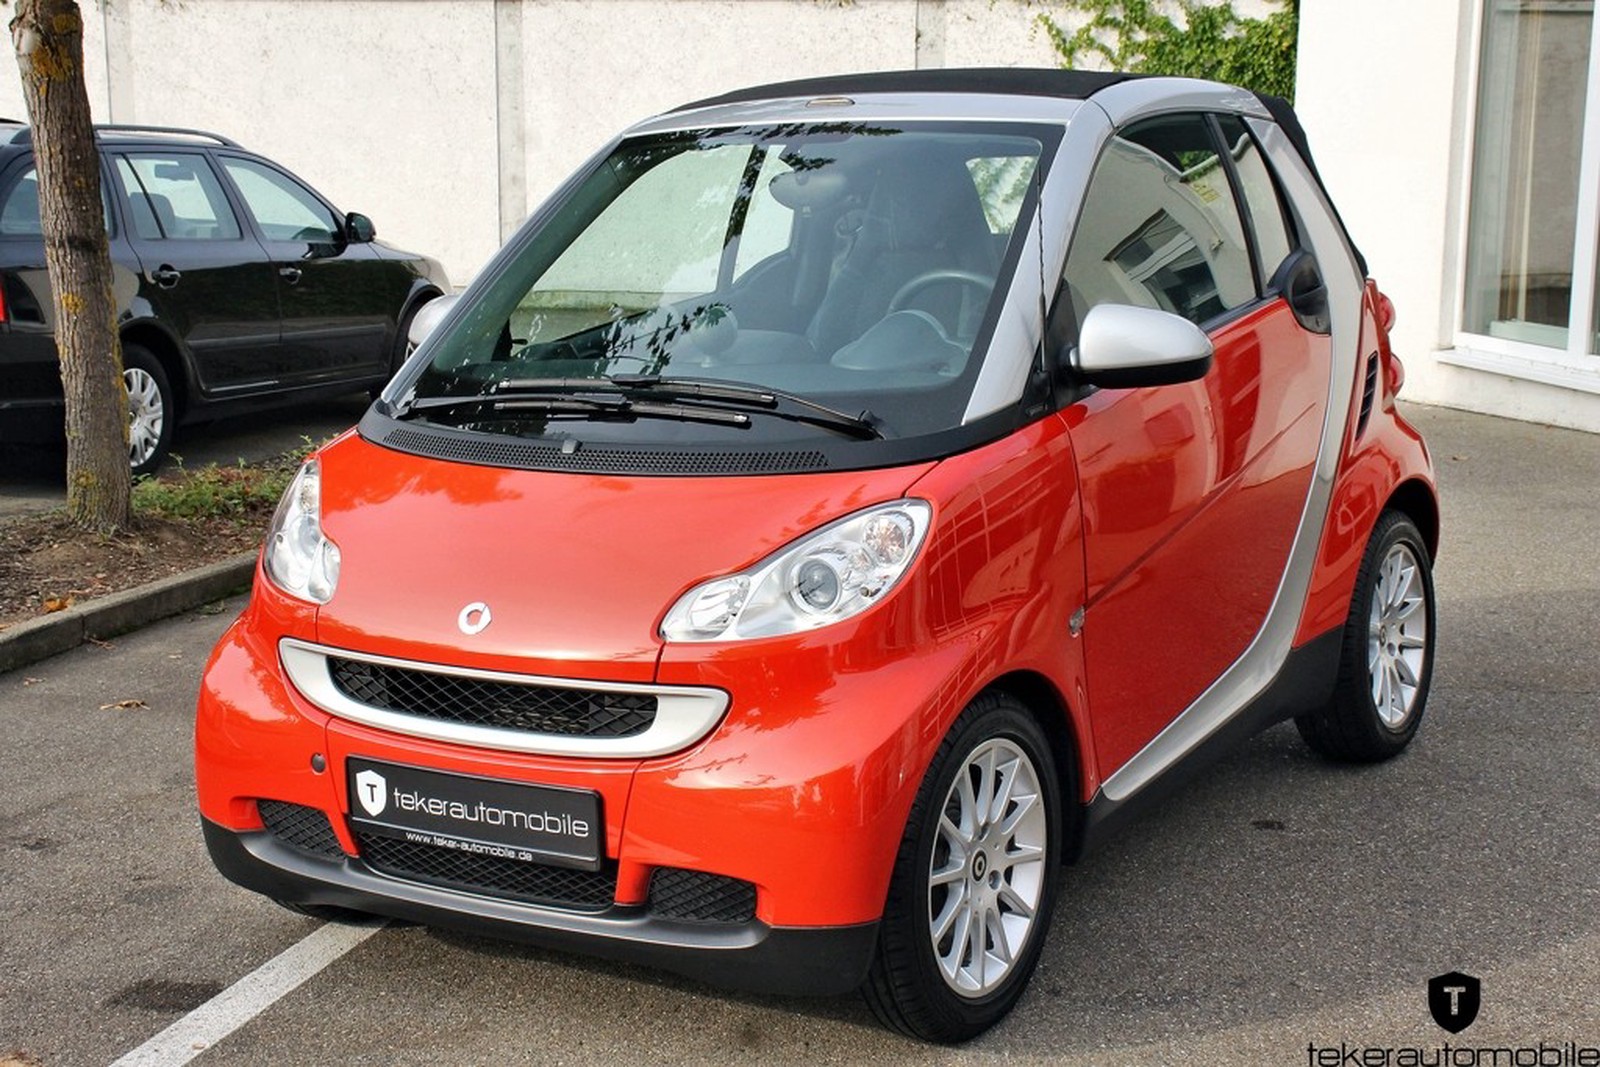 Smart ForTwo Fortwo Cabrio Passion gebraucht kaufen in N 252 rtingen Preis 5990 eur Int Nr 521